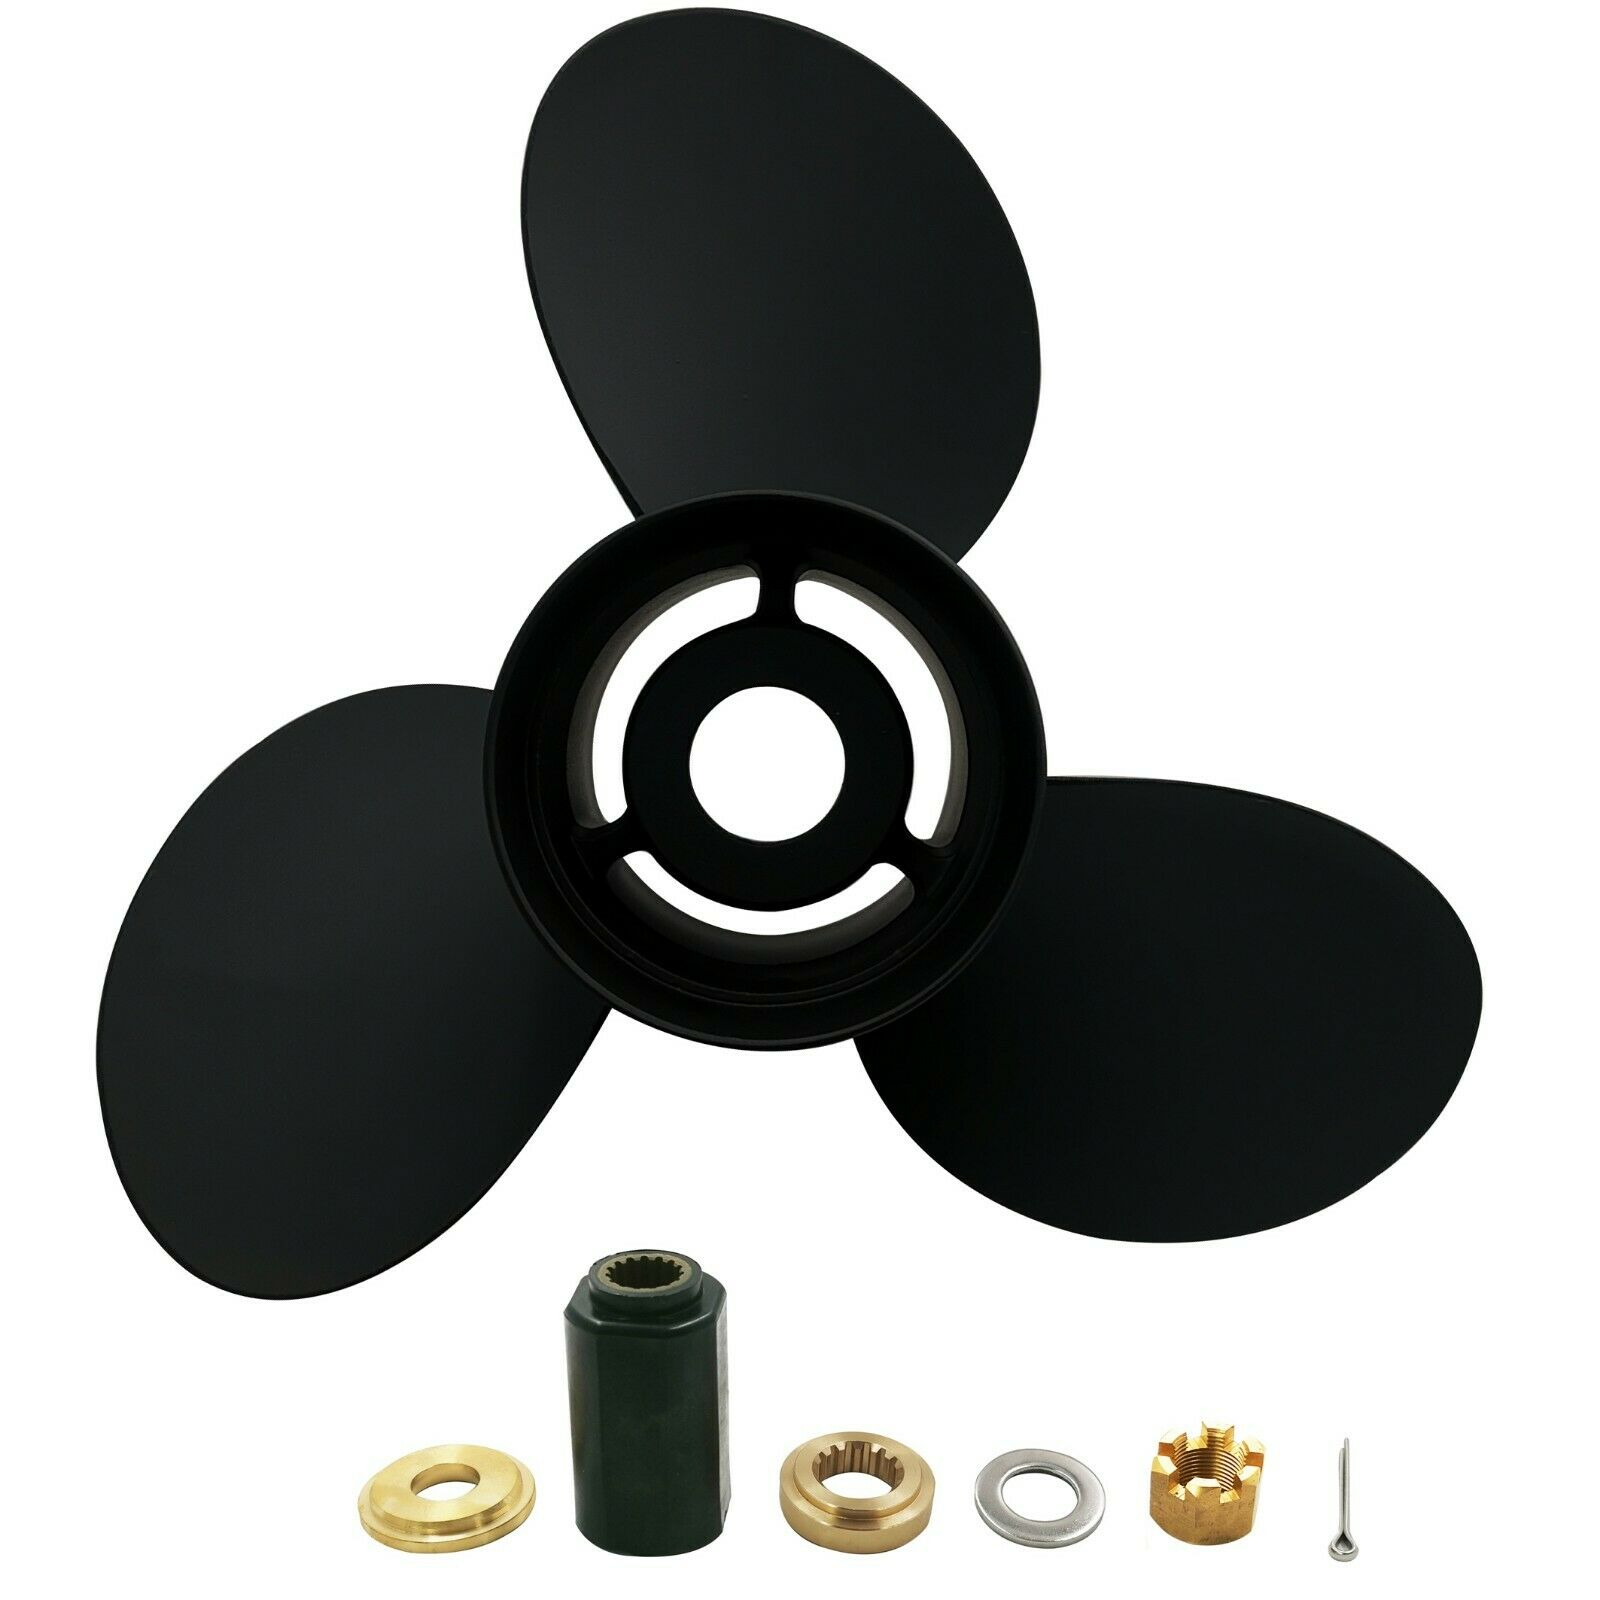 14 x 11 Aluminum Propeller For Tohatsu Nissan Outboard Engine 3HKB64523-0